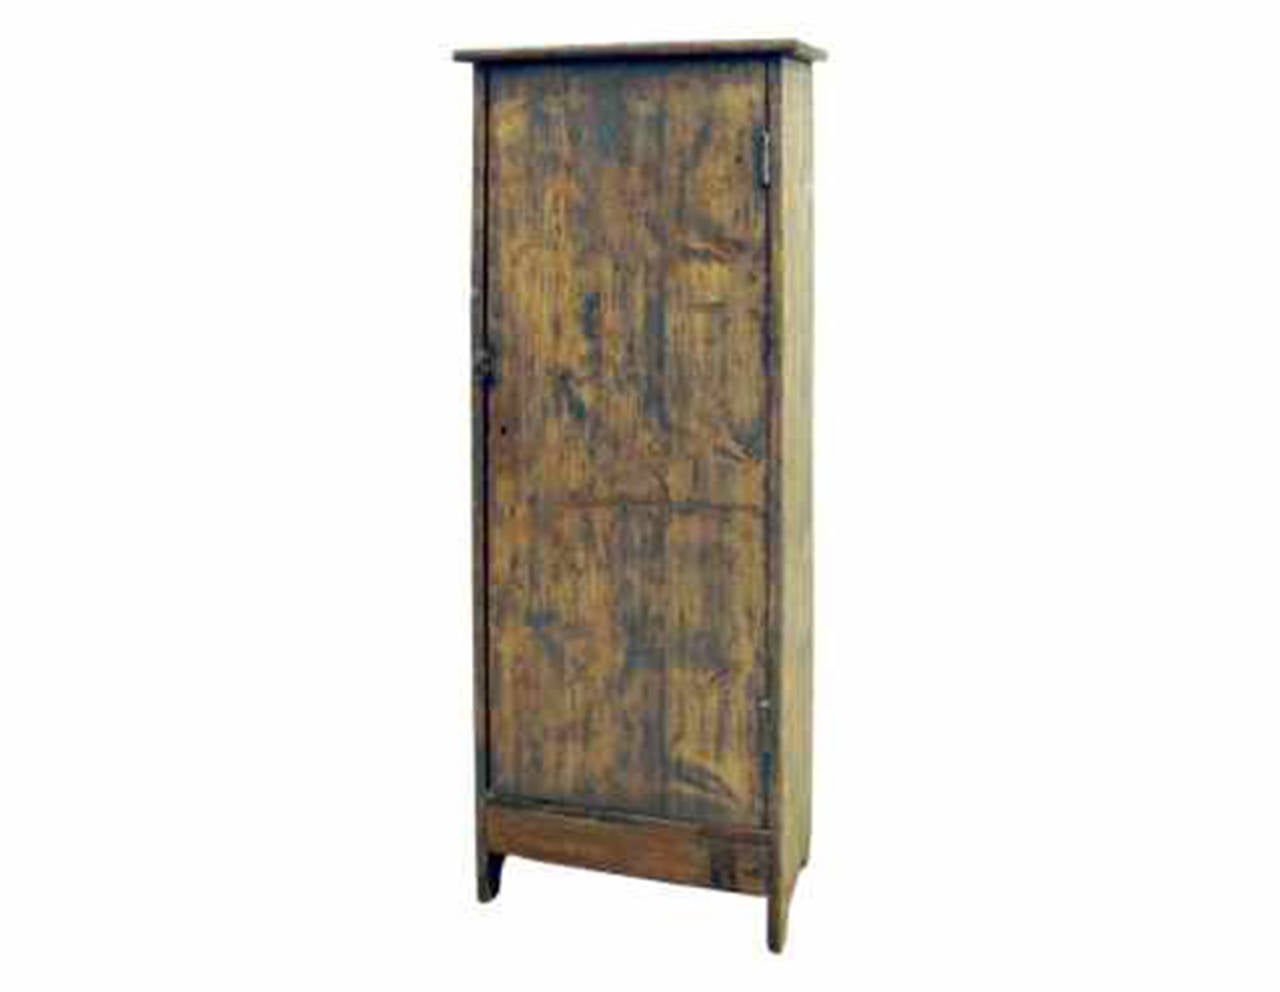 Fully restored one door wooden wardrobe.
Reclaimed wood with patina finish.